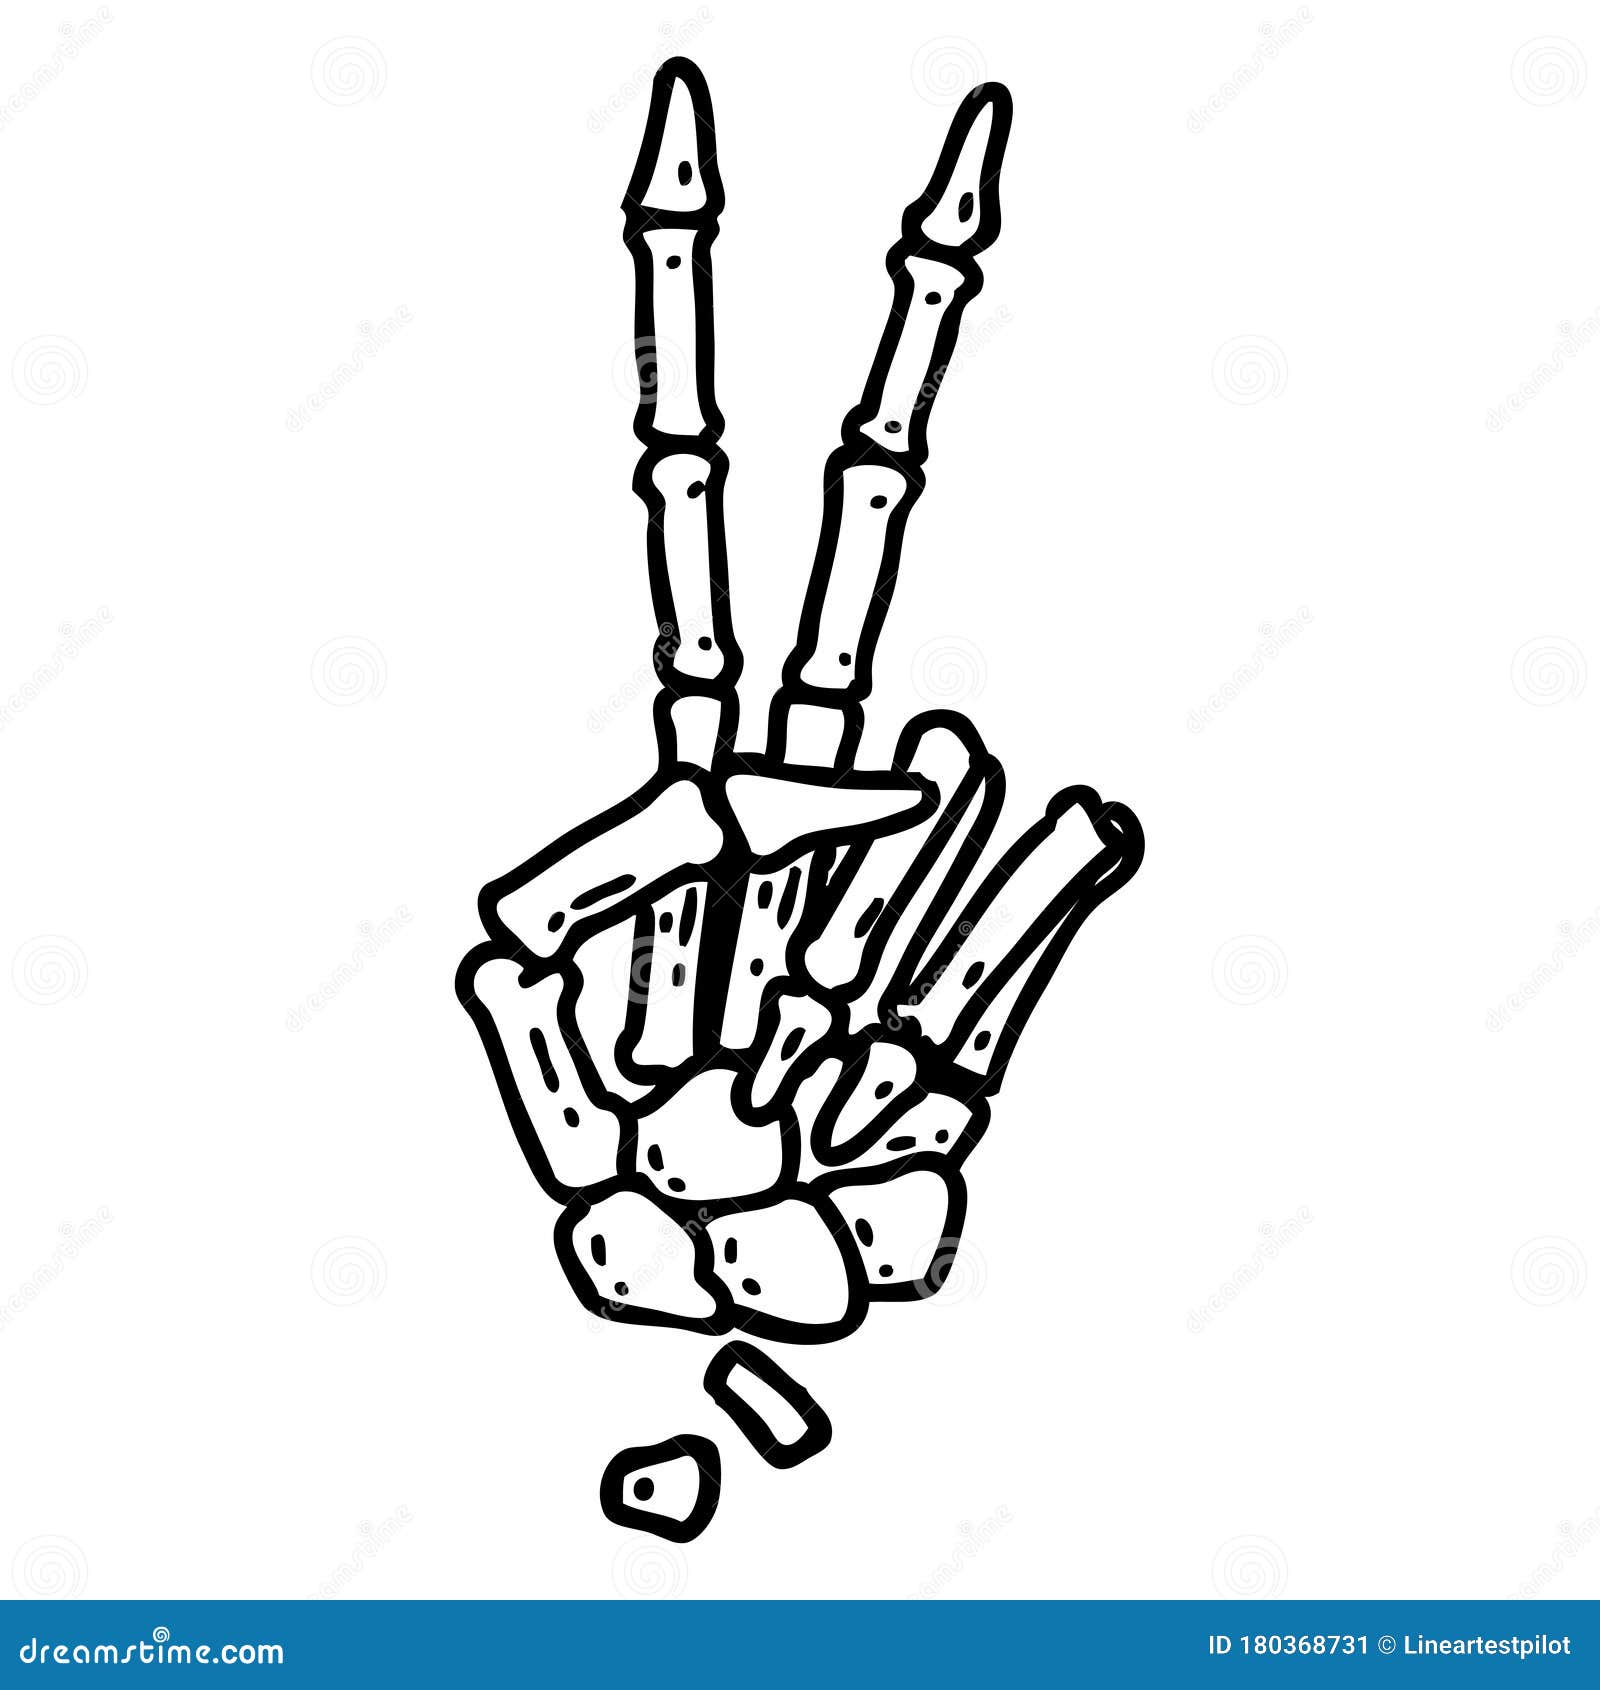 Tattoo style icon of a skeleton hand giving a peace sign Iconic tattoo  style image of a skeleton giving a peace sign  CanStock